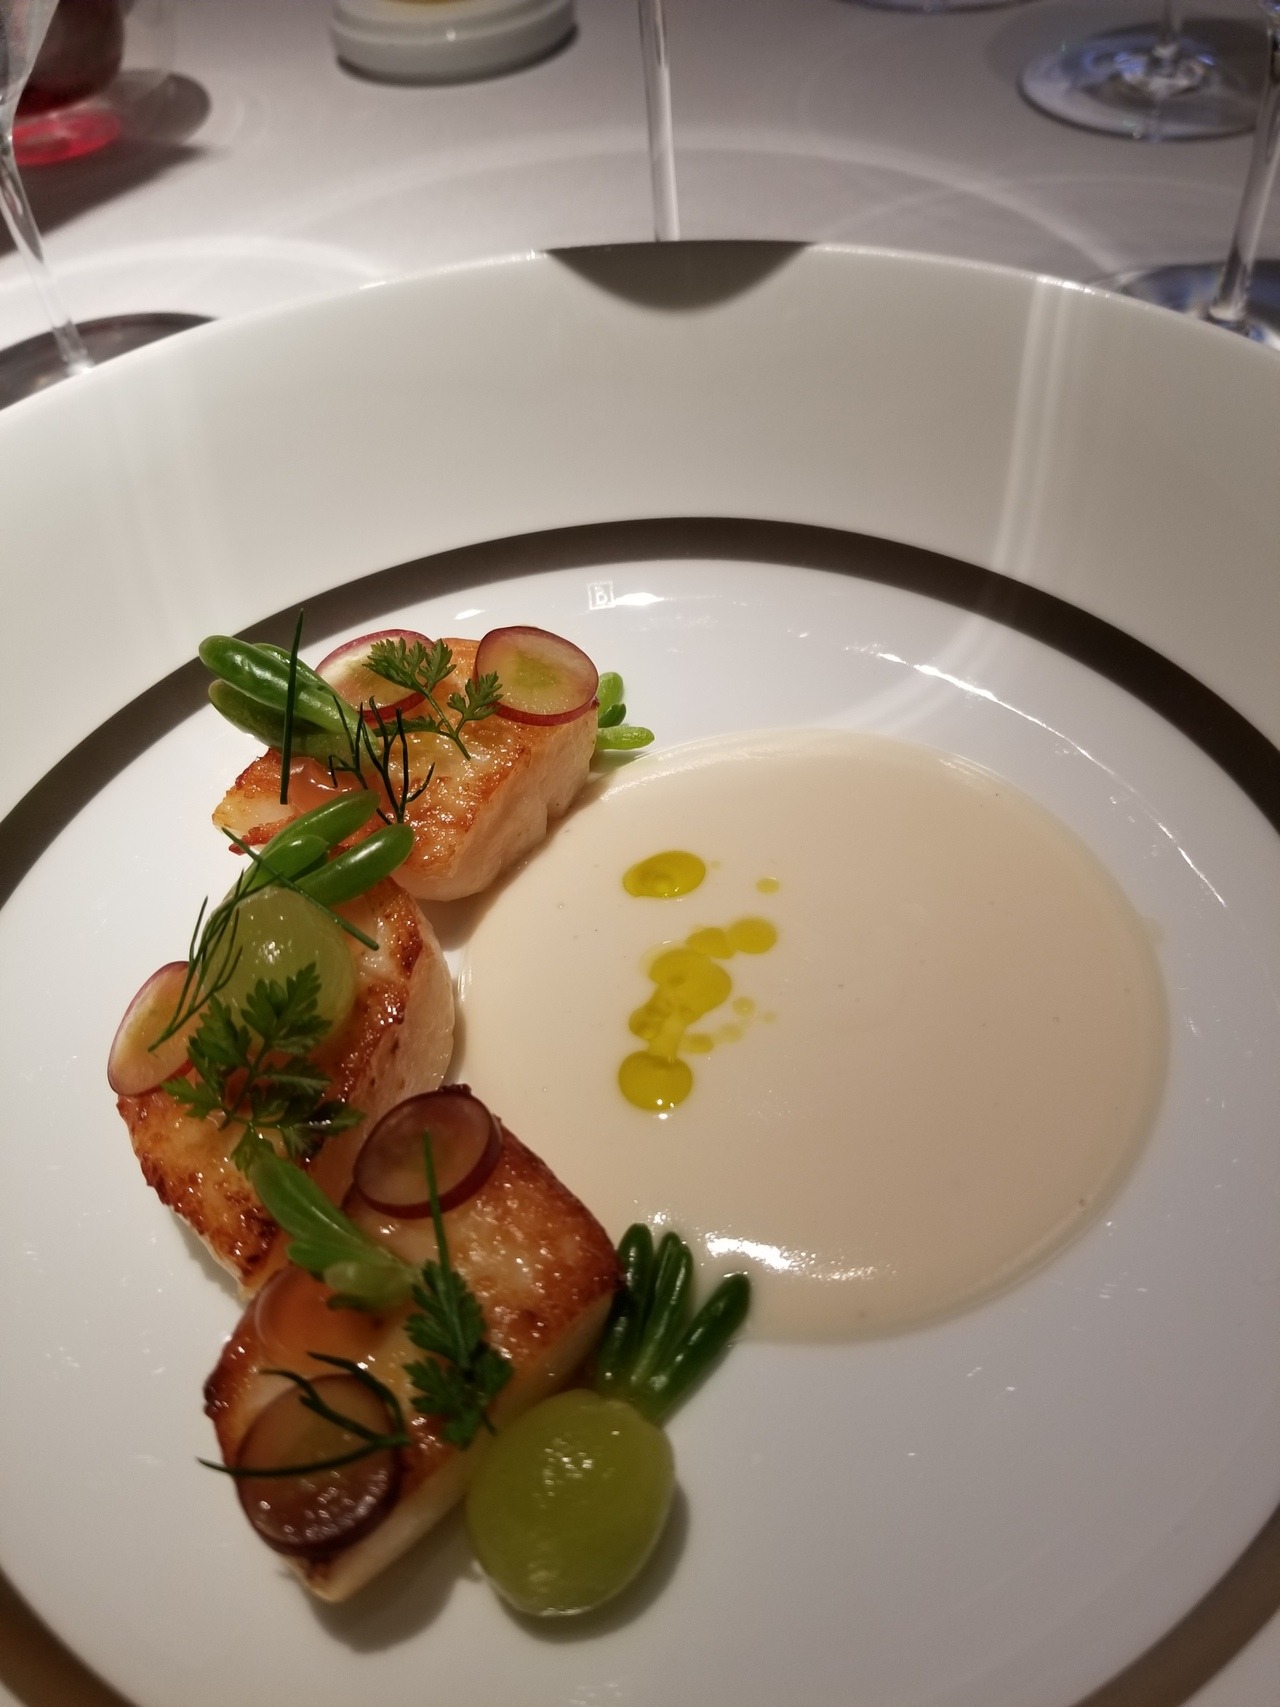 While in London, we had the privilege of having lunch at Restaurant Gordon Ramsay, in Chelsea. The most amazing food you will ever have in your life. I did not get pictures of everything, I was too busy being awed and savoring each delectable morsel.